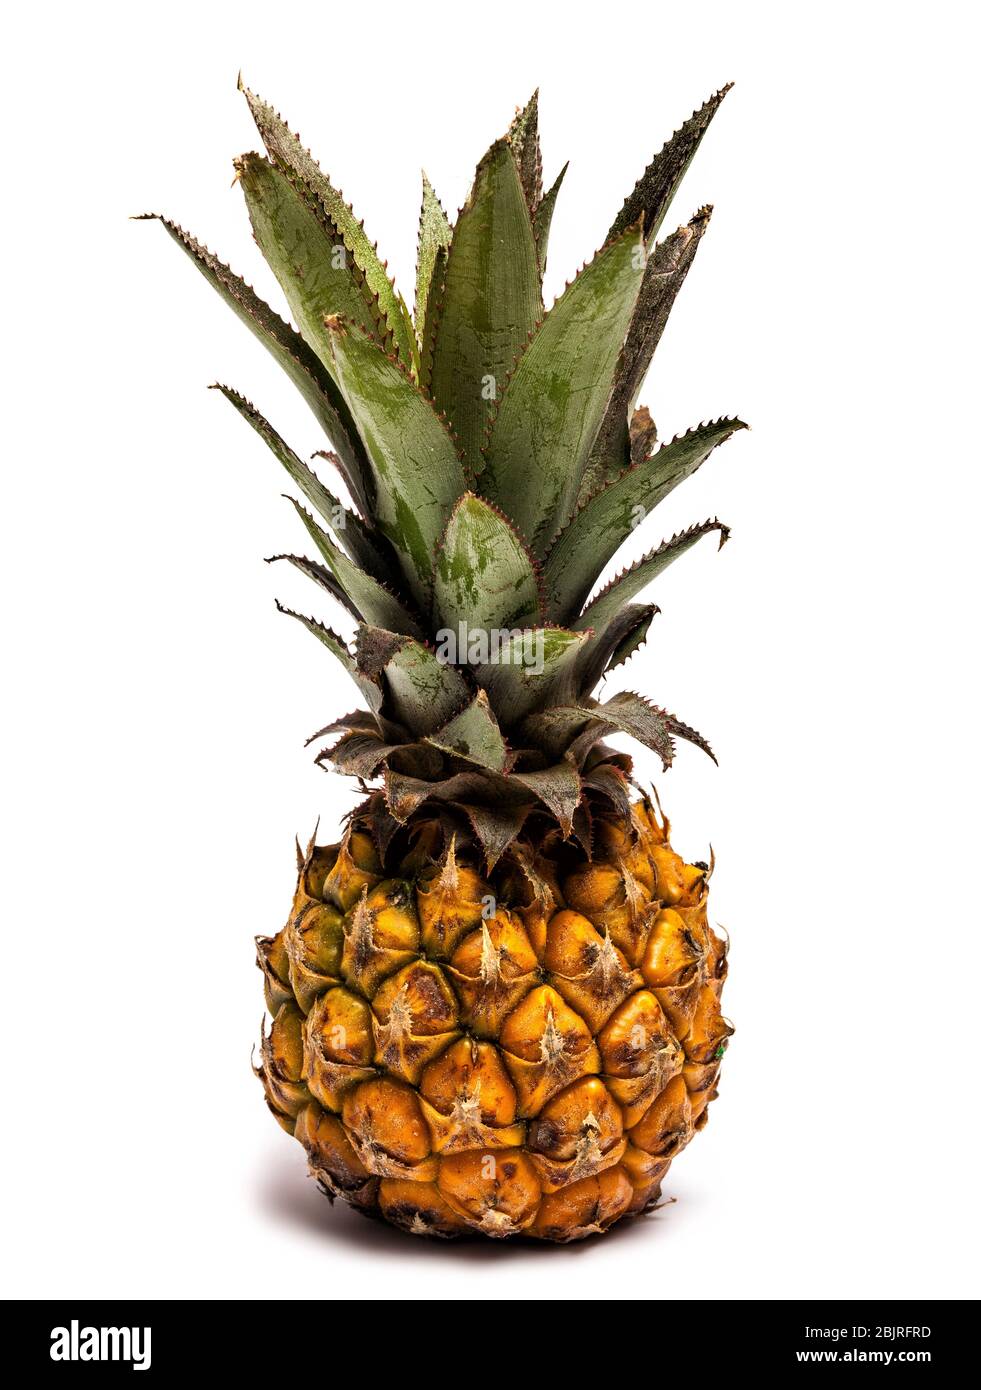 Nano pineapple on white. Plant genus of the Bromeliad family, Bromeliaceae. From South America and Central America. Stock Photo